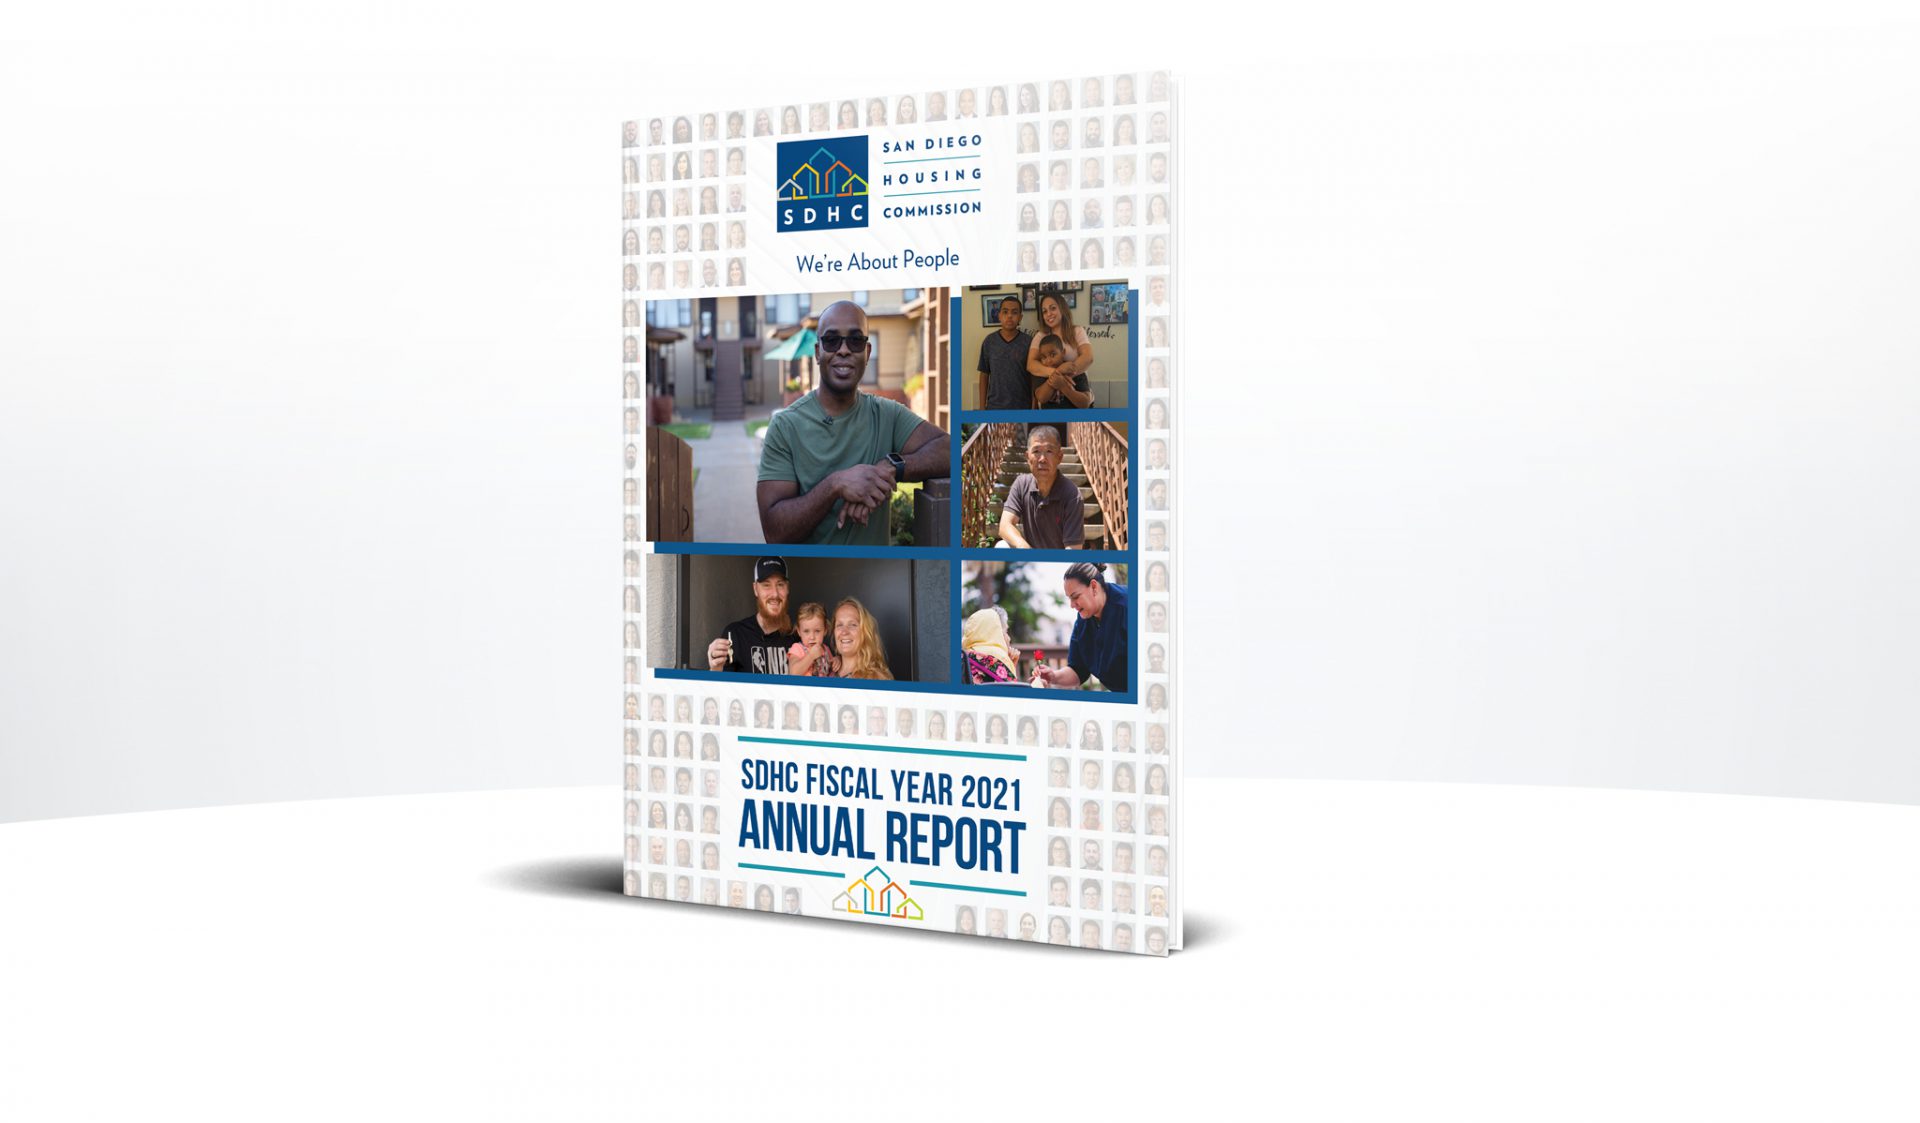 San Diego Housing Commission’s Multimedia Annual Report Highlights the Agency’s Positive Impact in a Year Dominated by COVID-19